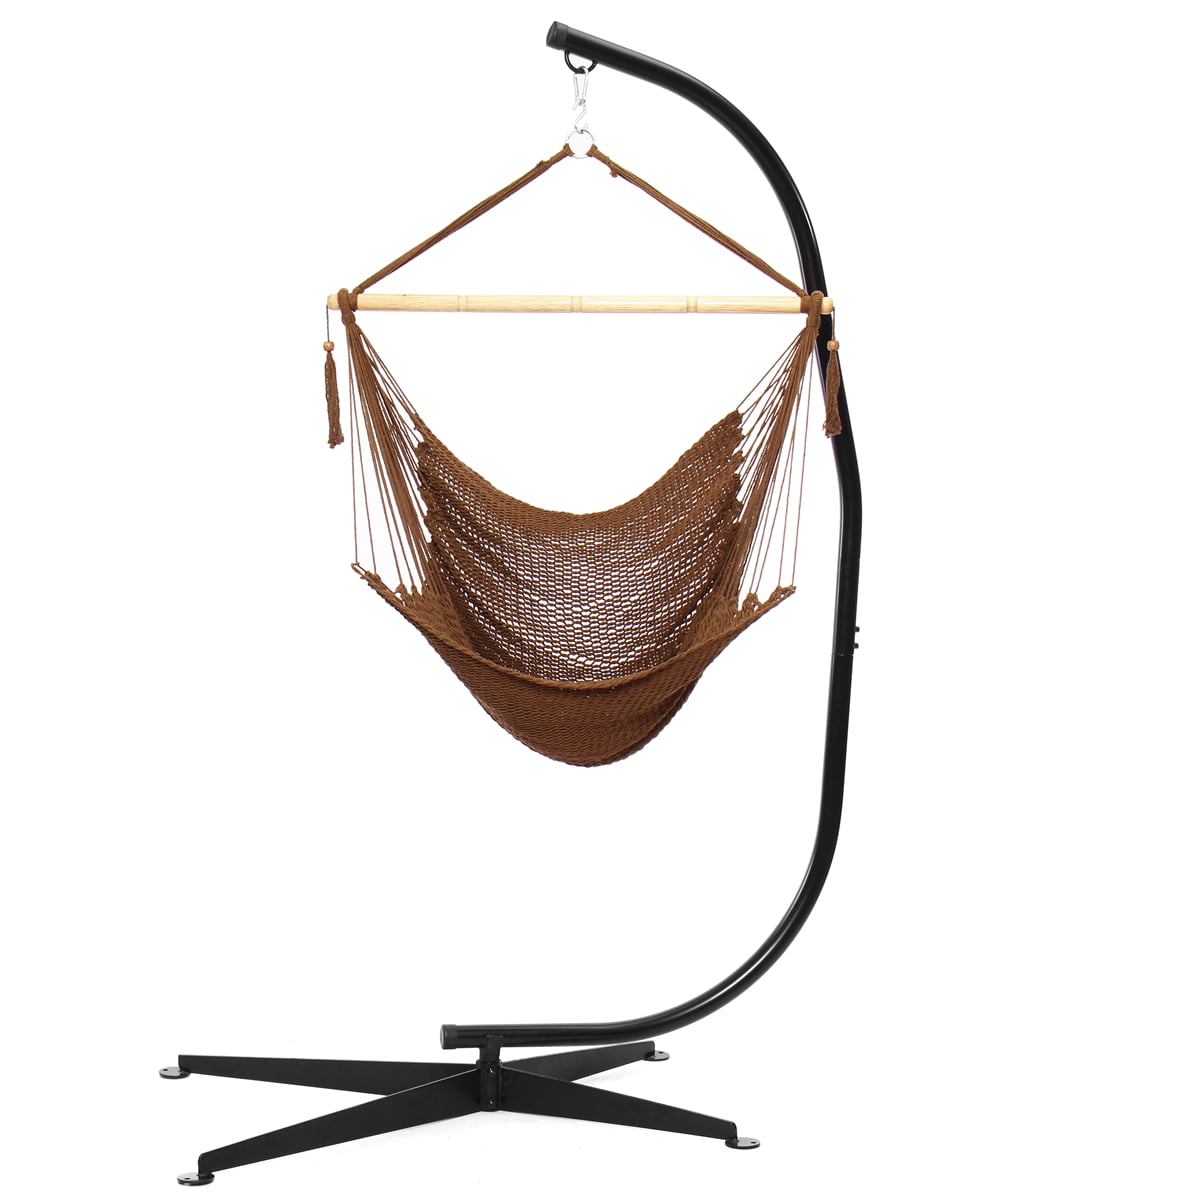 Stand Outdoor Swing Chair Indoor, Hammock Swing Chair With Stand Outdoor